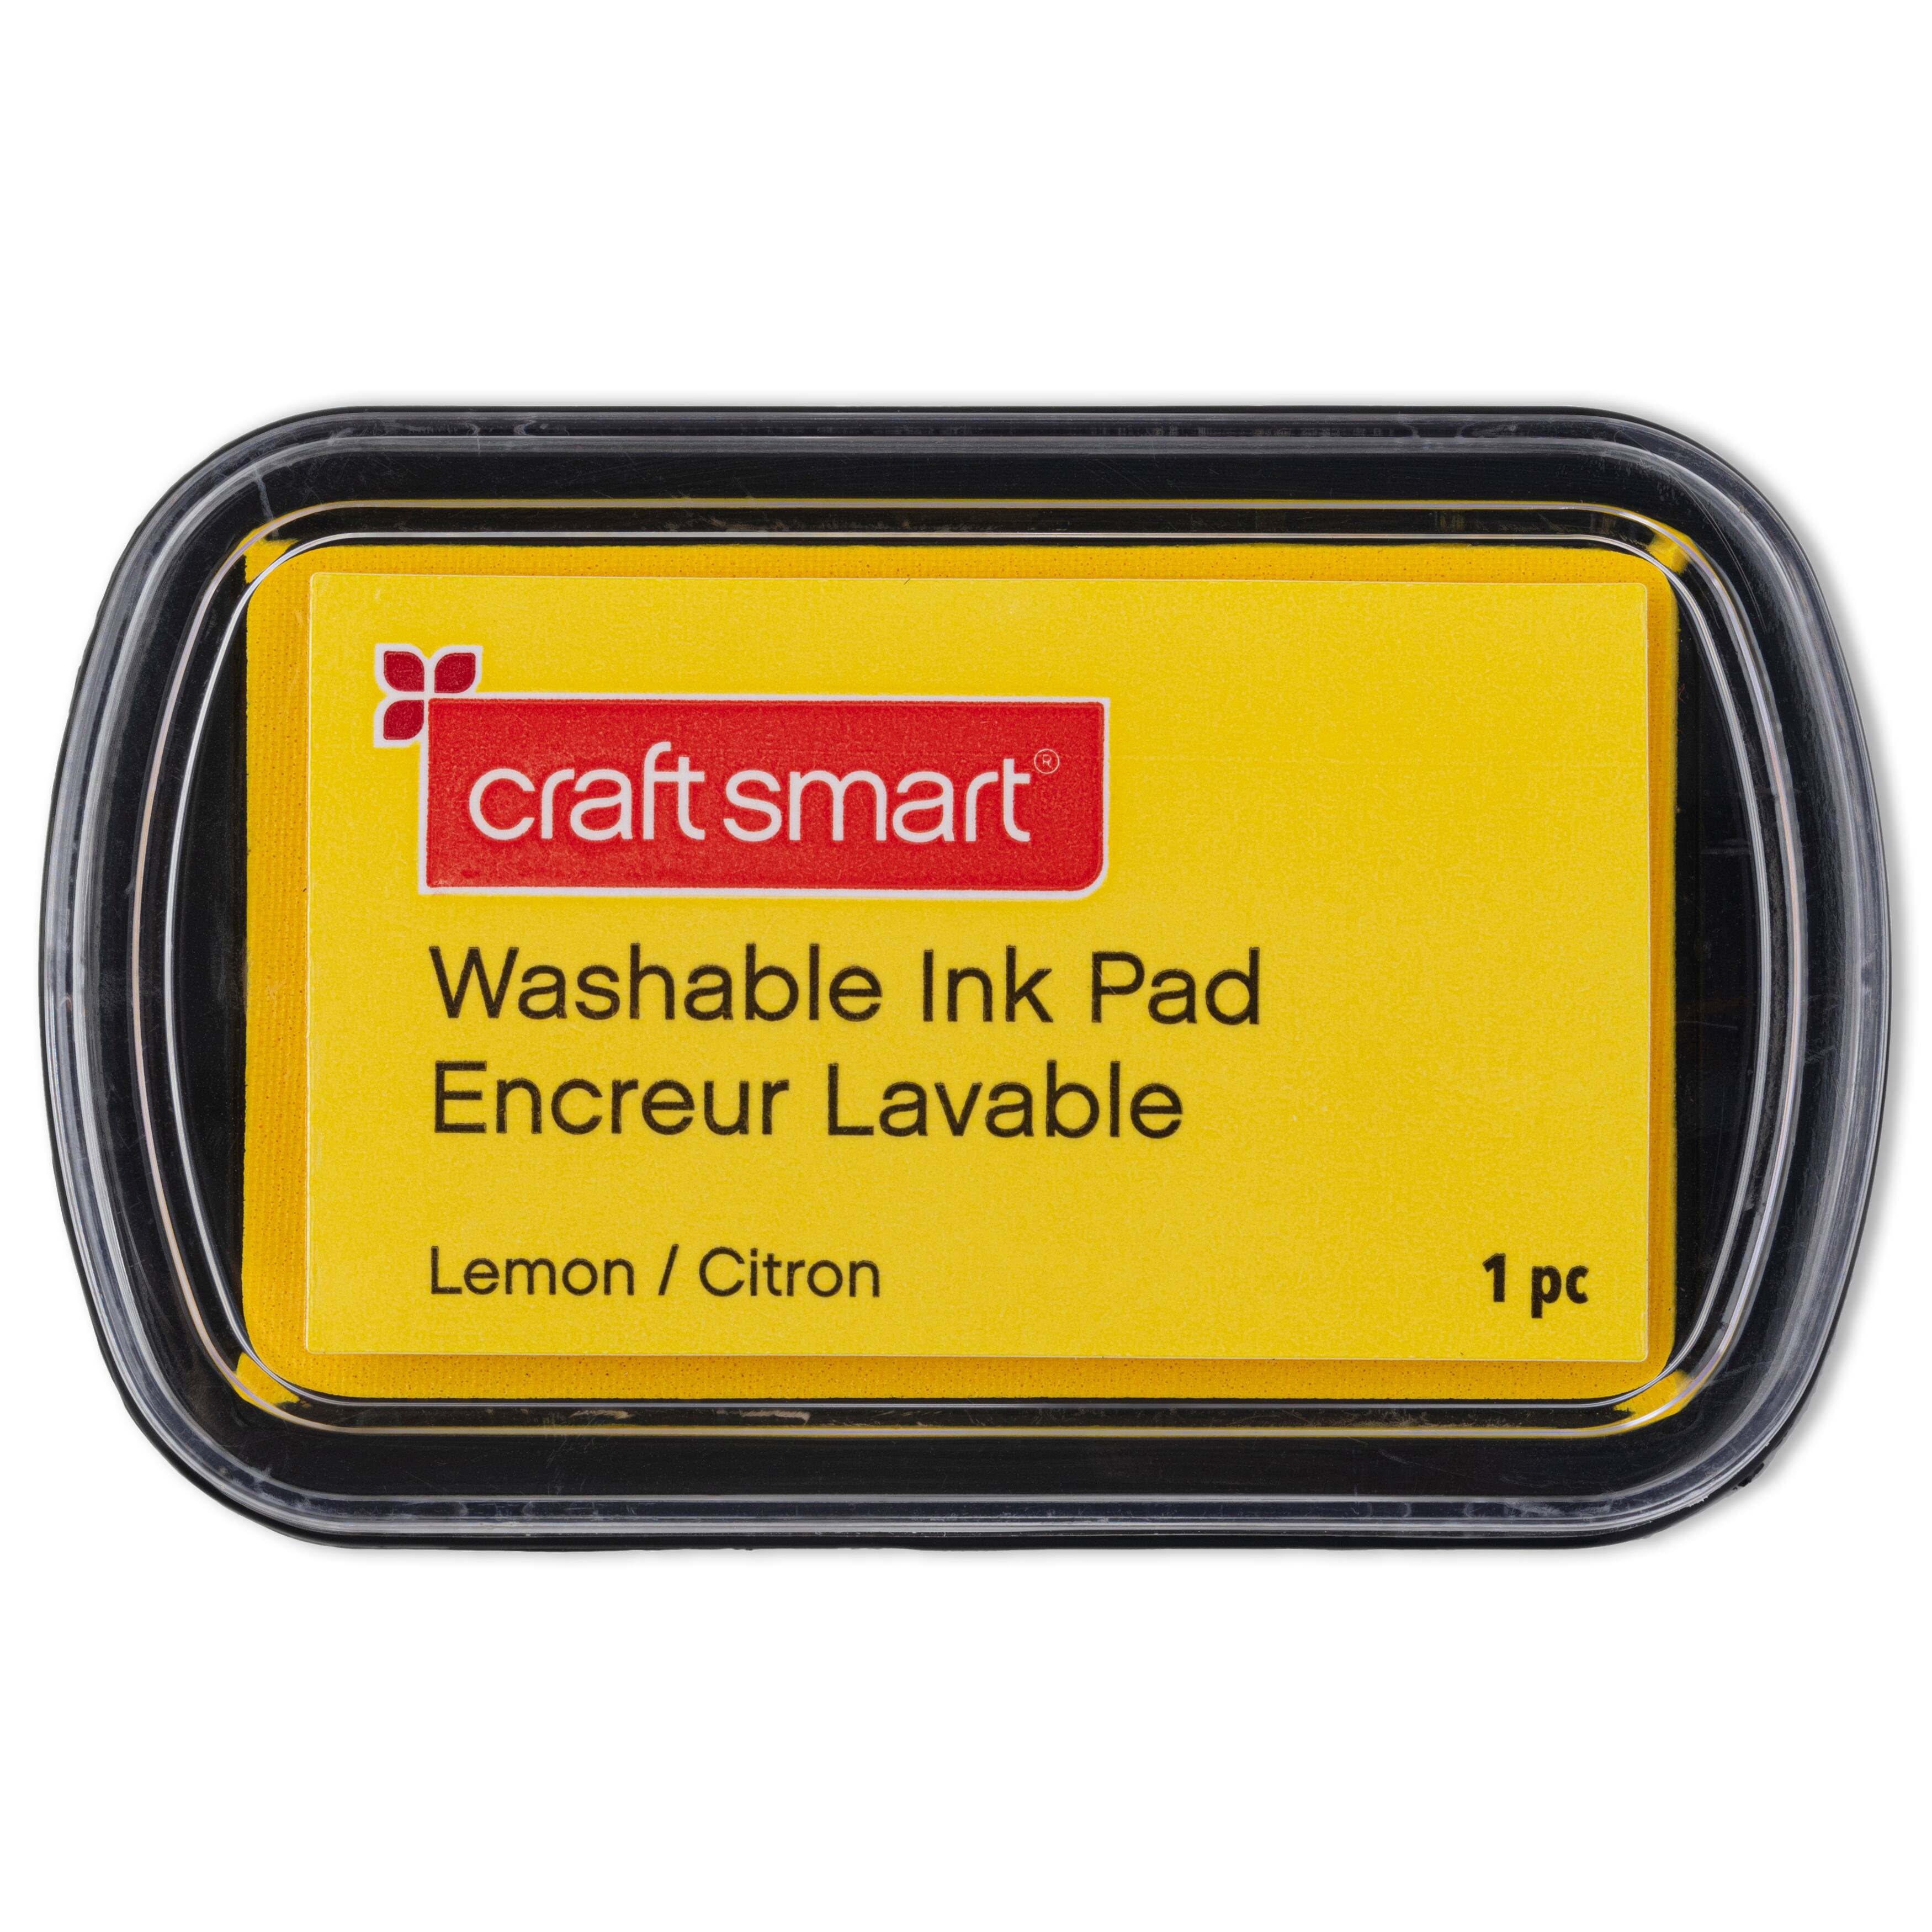 12 Pack: Washable Ink Pad by Craft Smart